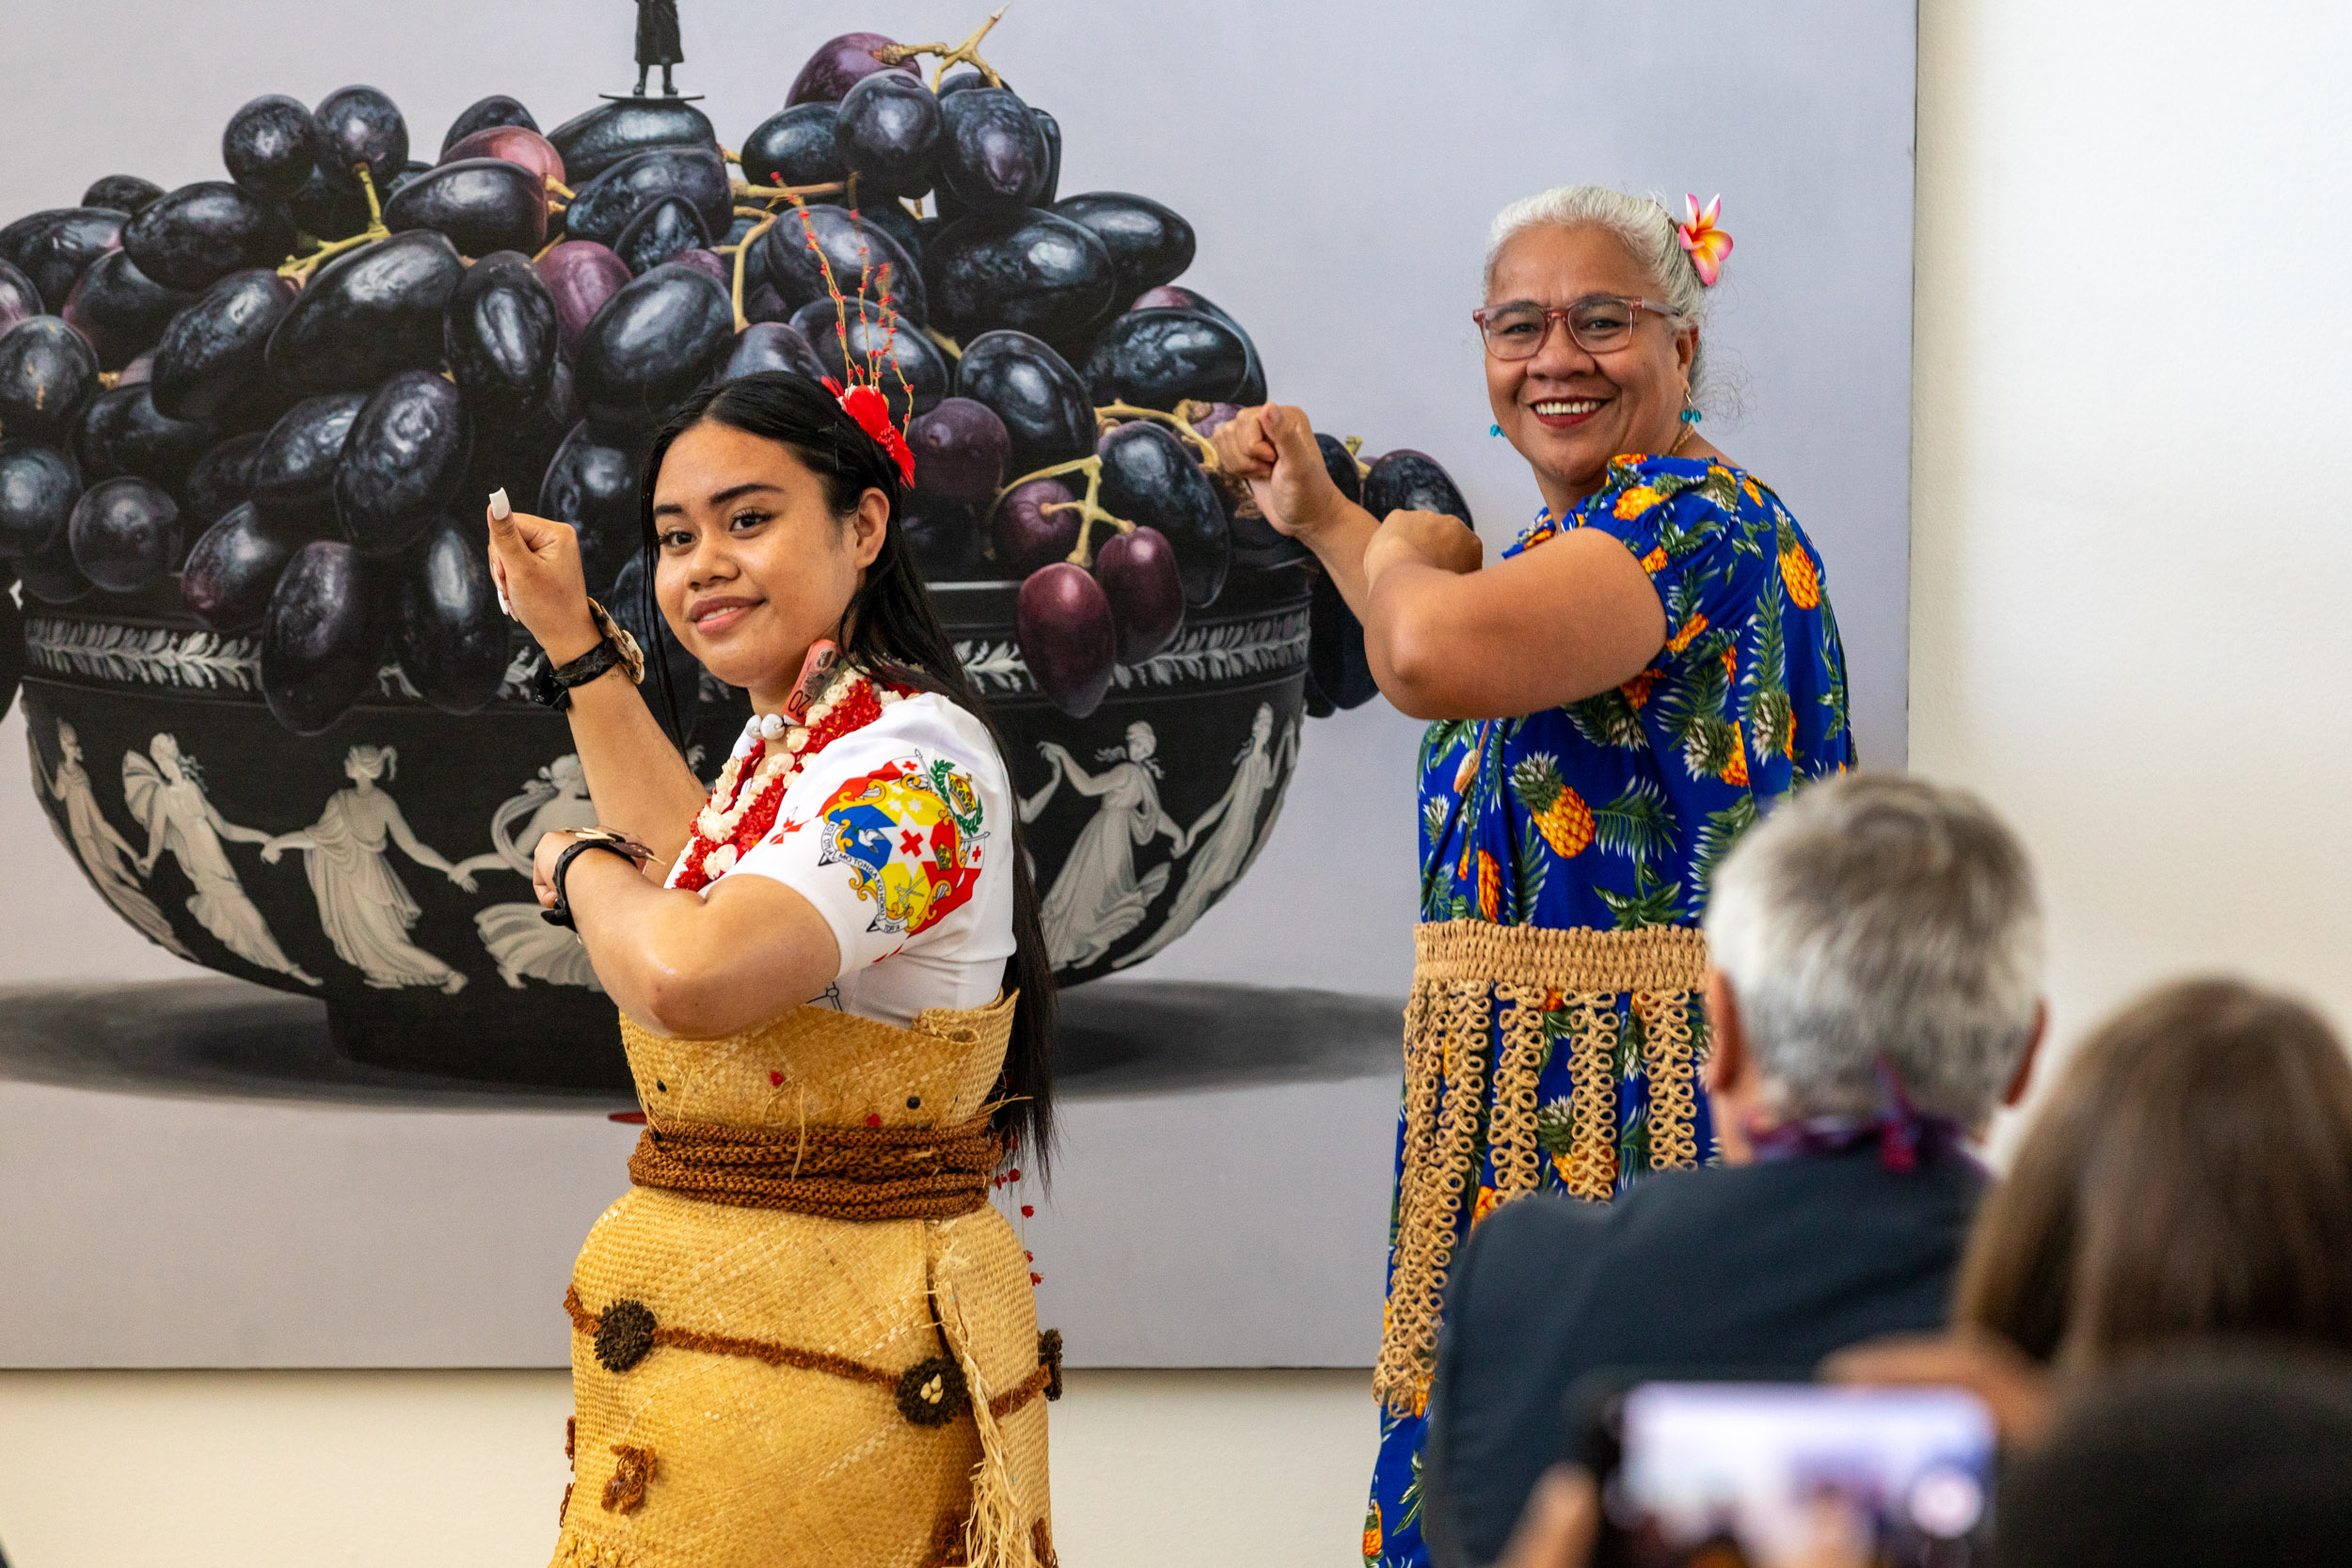 Two women dance wearing traditional Pacific dress in front of a bowl of purple grapes